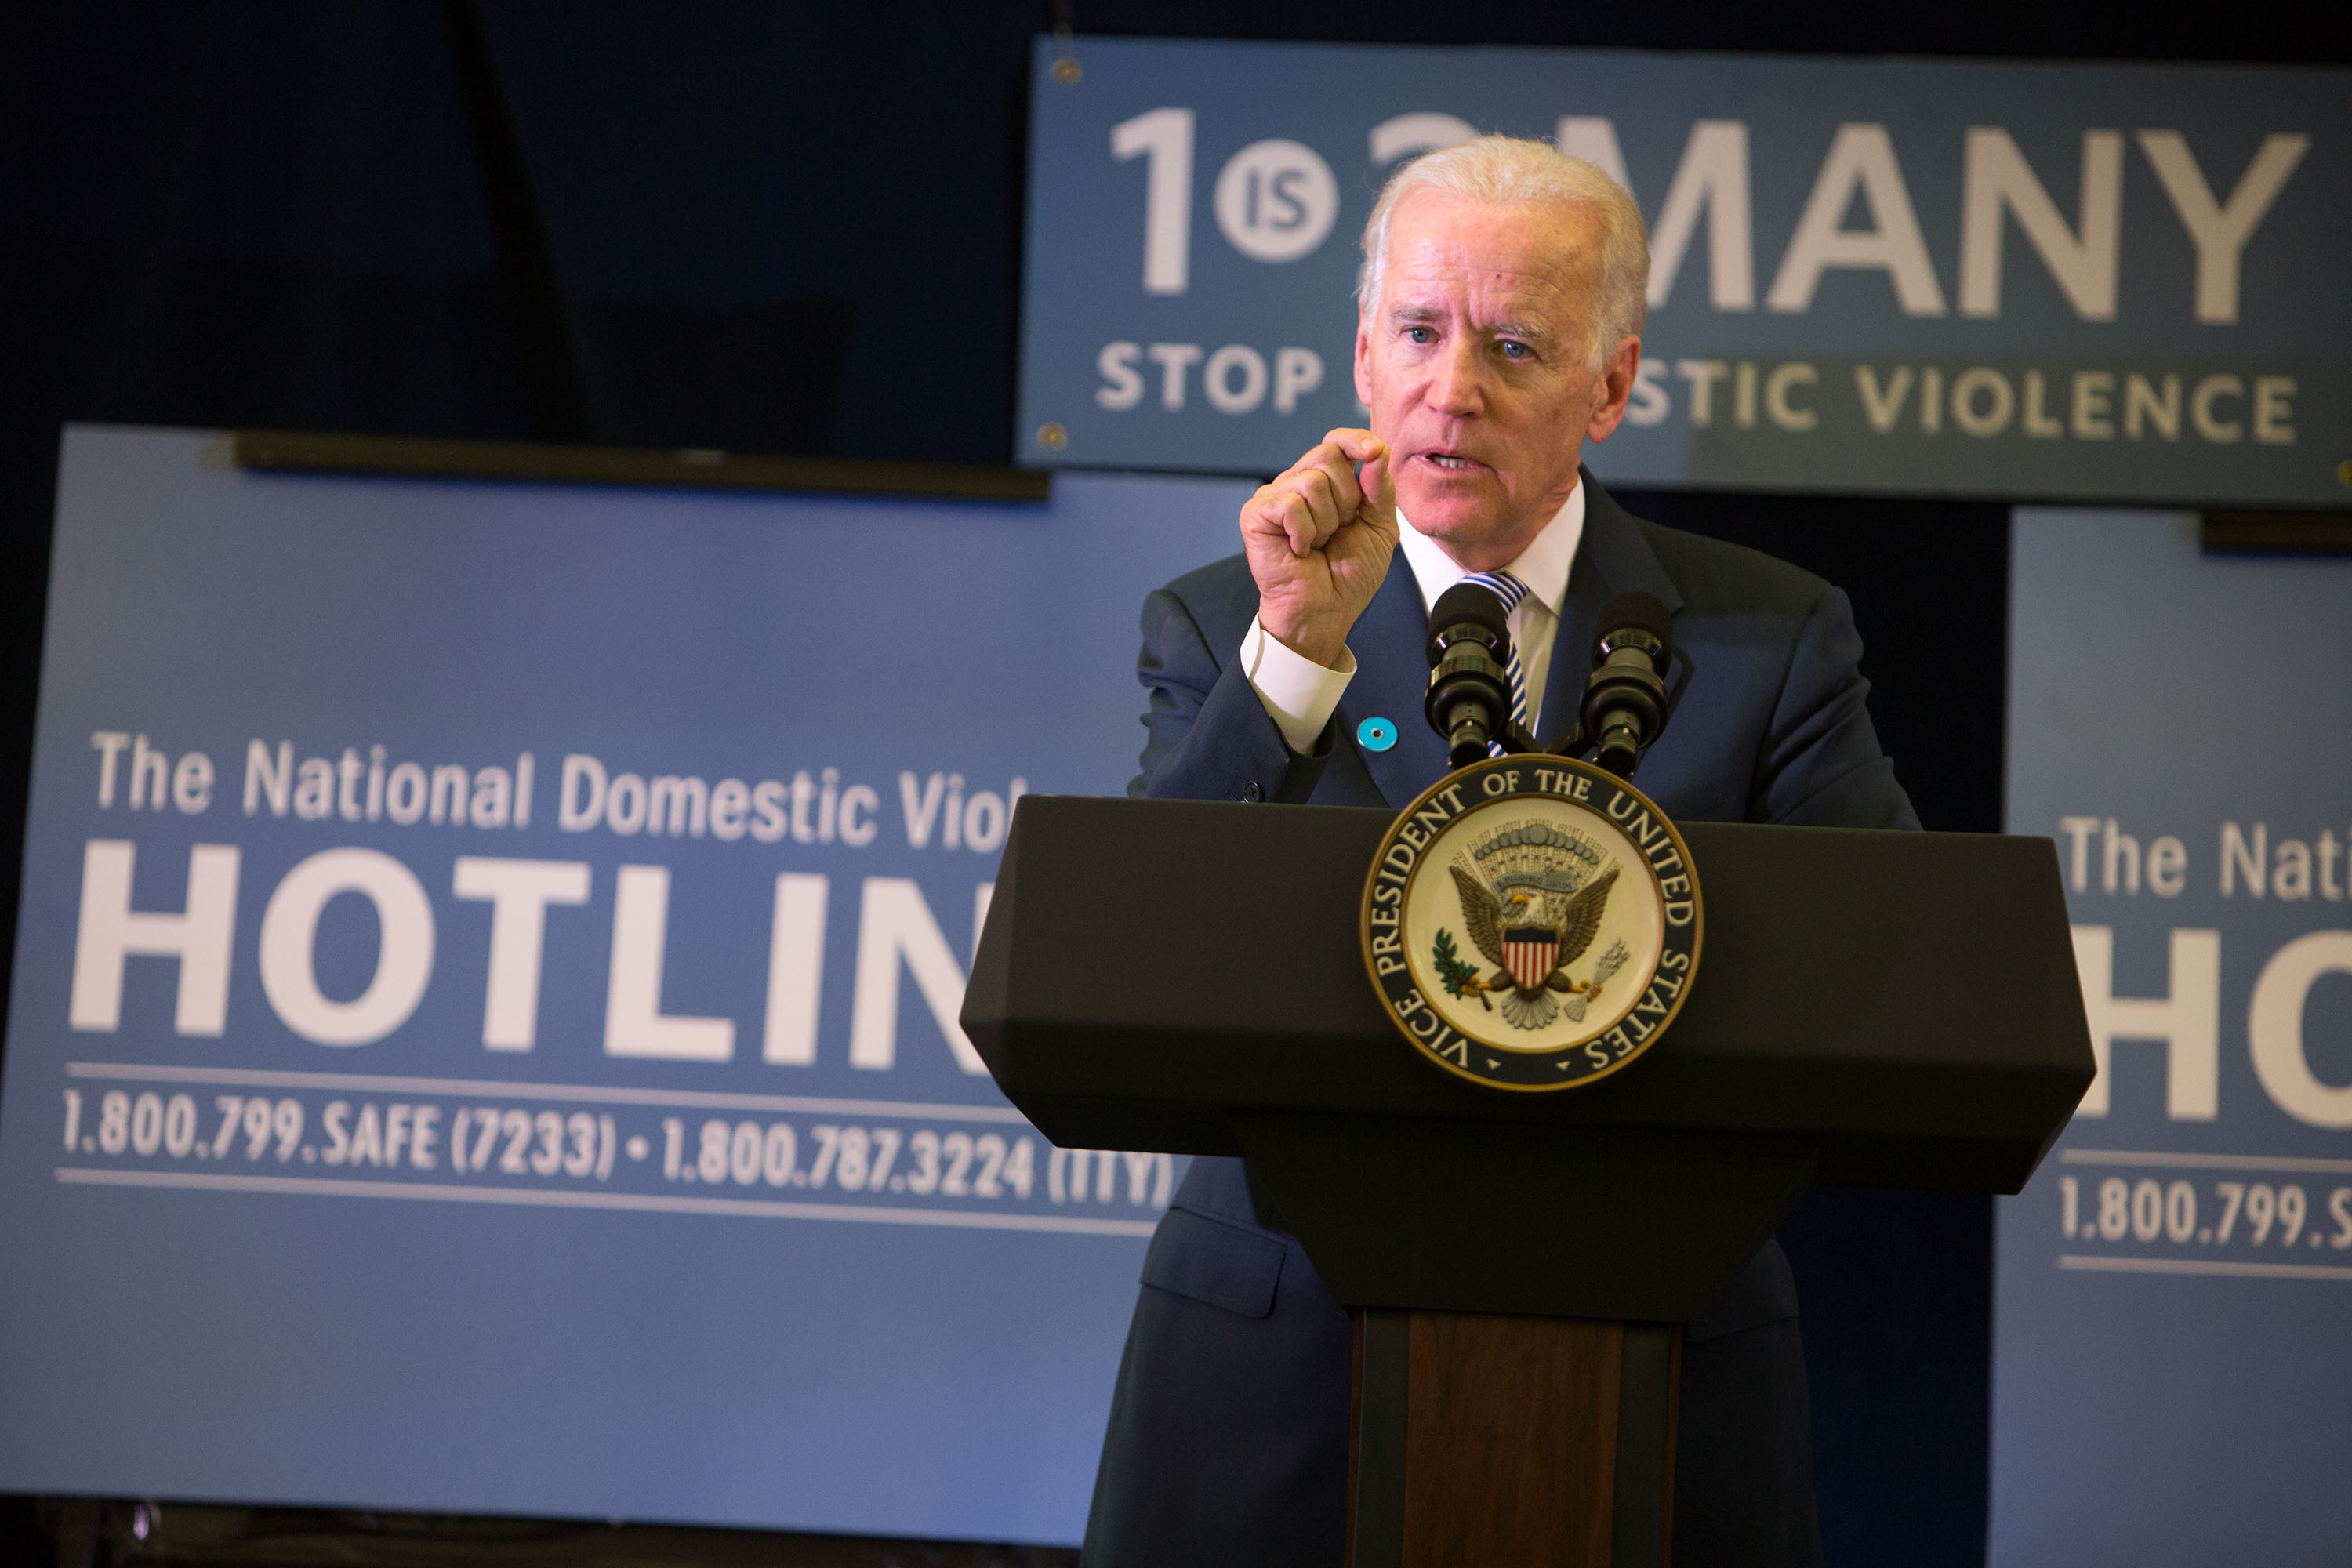 Vice President Joe Biden speaks at an event at the National Domestic Violence Hotline